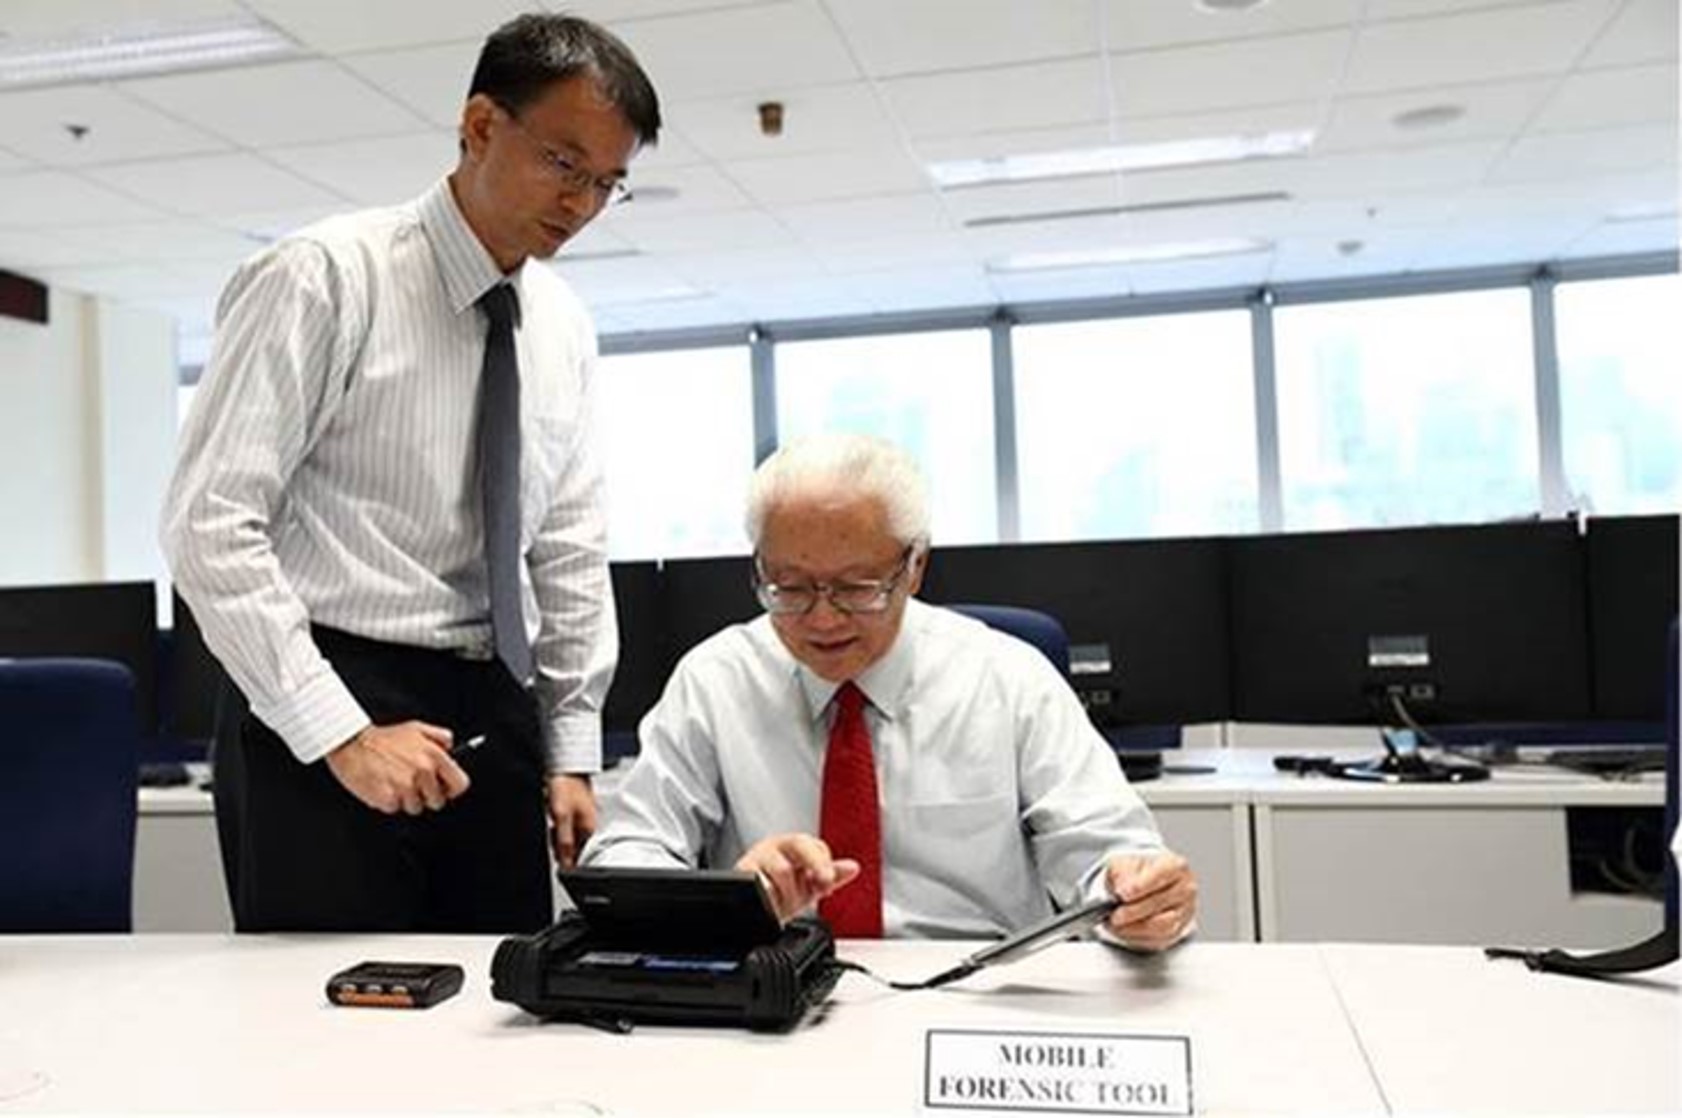 Tuan Liang (left) showing then President of Singapore, Tony Tan Keng Yam, the mobile forensic tool, on 27 April 2016